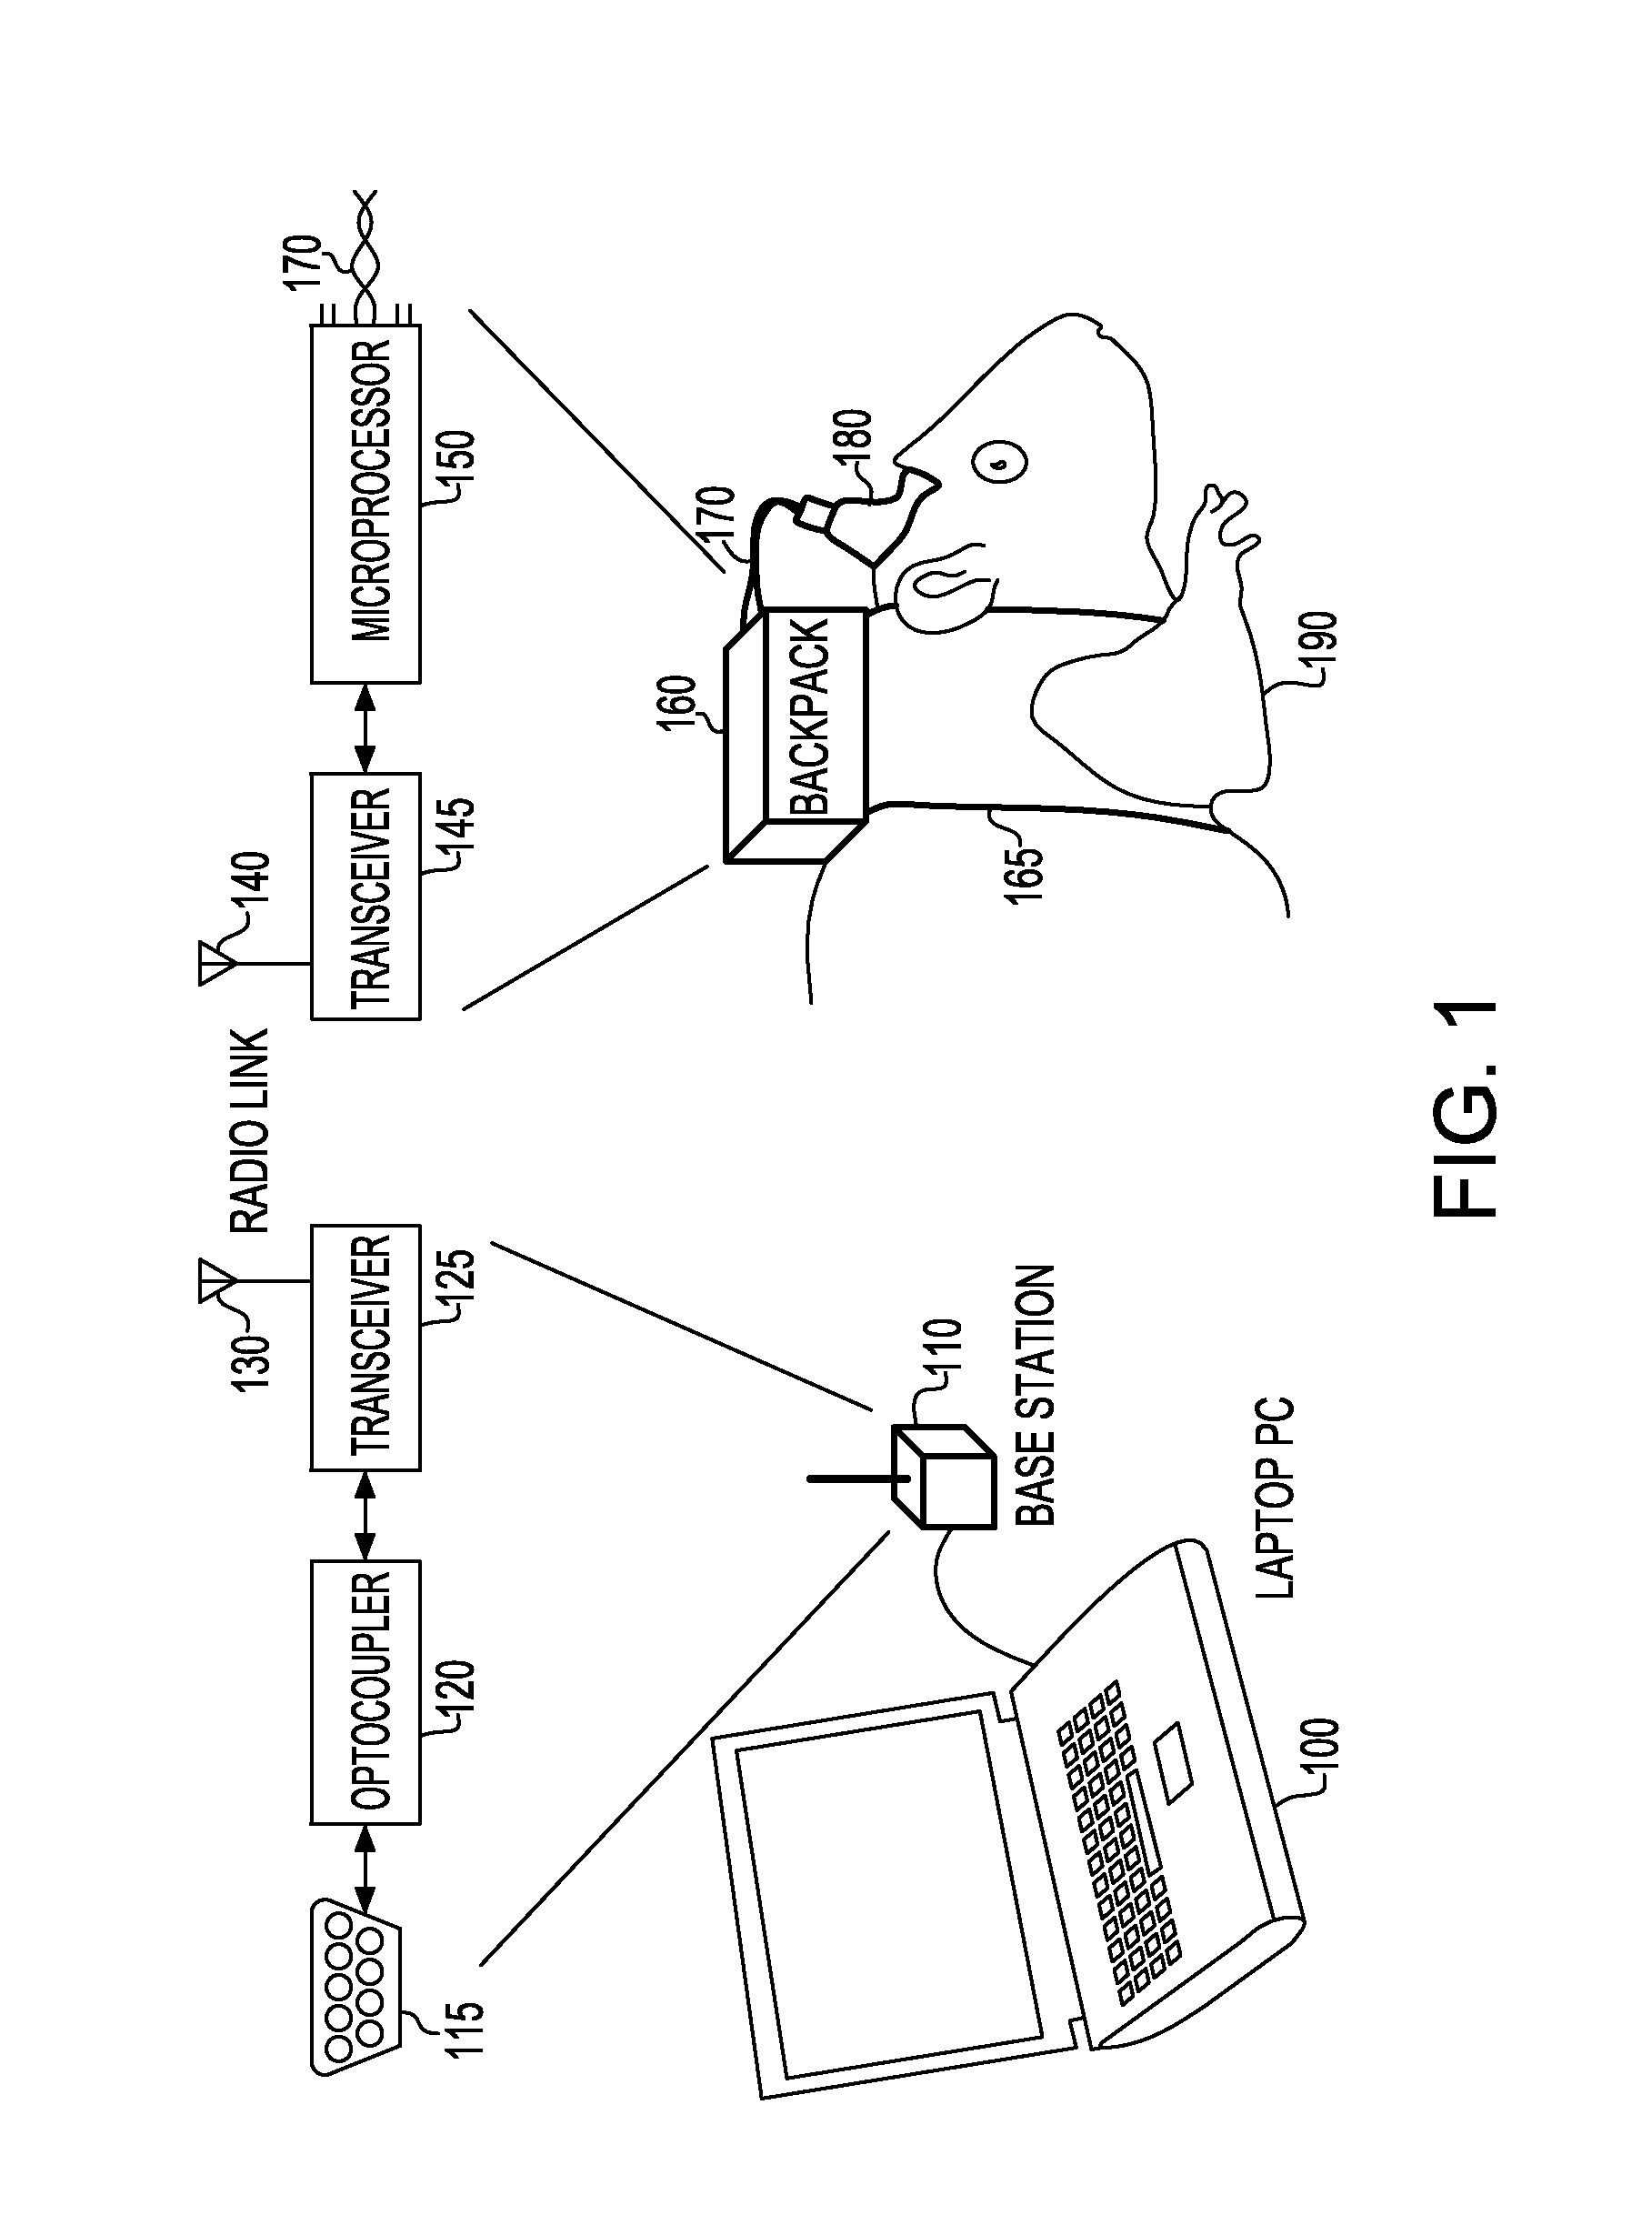 Method and apparatus for teleoperation, guidance and odor detection training of a freely roaming animal through brain stimulation